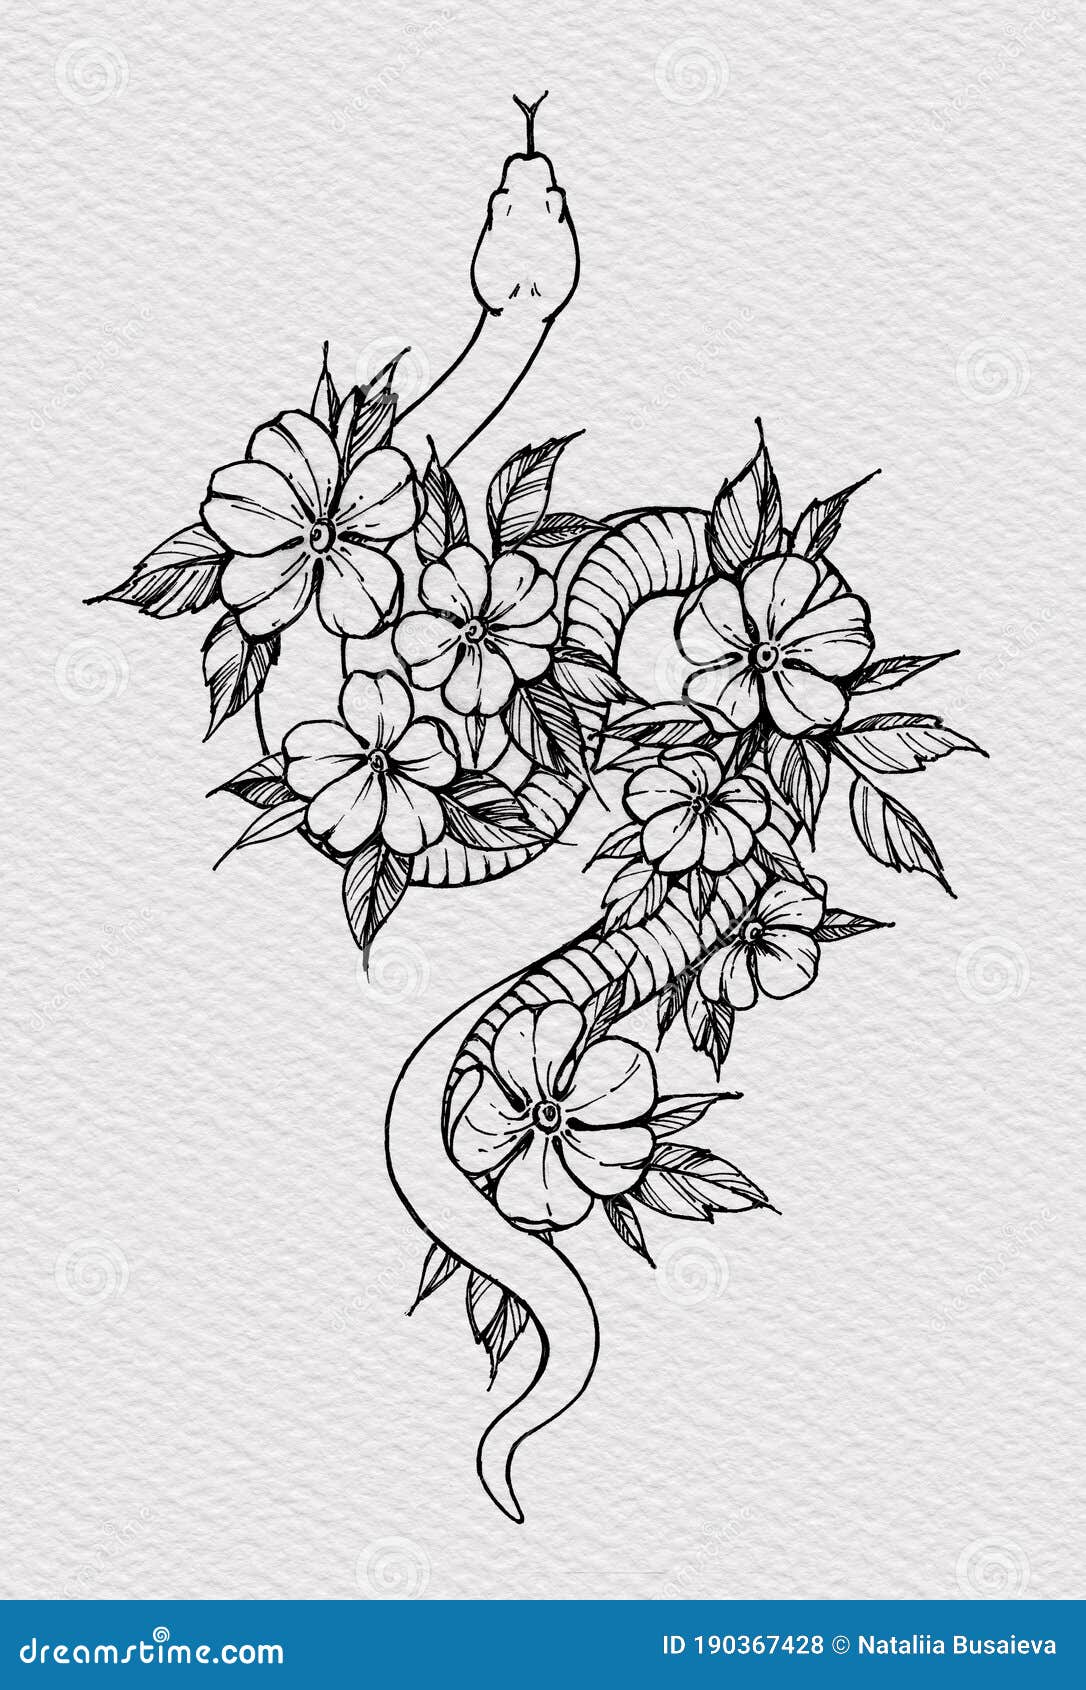 600 Drawing Of A Snake And Flower Tattoo Illustrations RoyaltyFree  Vector Graphics  Clip Art  iStock